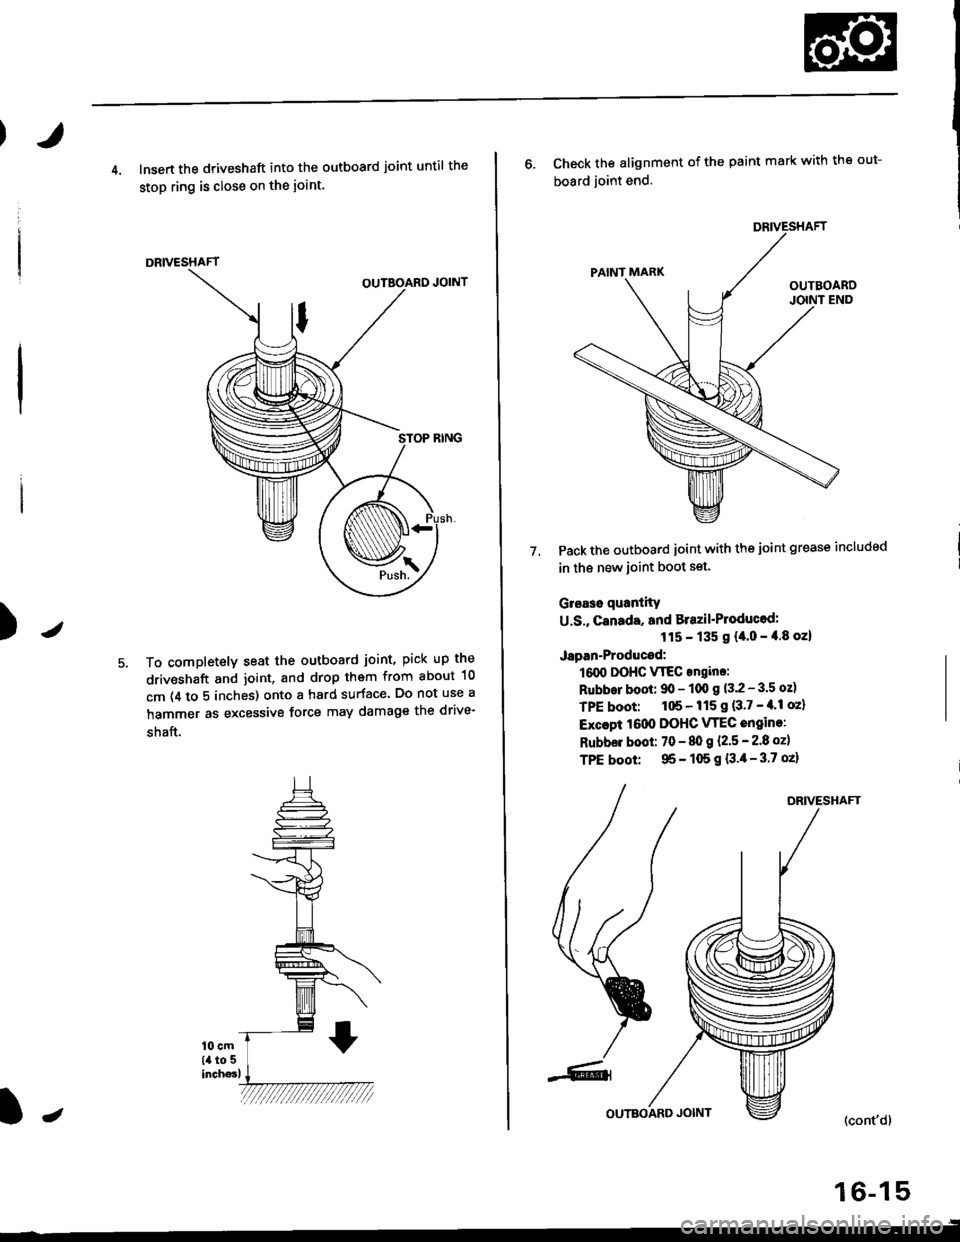 HONDA CIVIC 1999 6.G Service Manual J)
4. lnsert the driveshaft into the outboard joint until the
stop ring is close on the ioint.
DRIVESHAFT
To completely seat the outboard joint, pick up the
driveshaft and joint, and drop them from ab